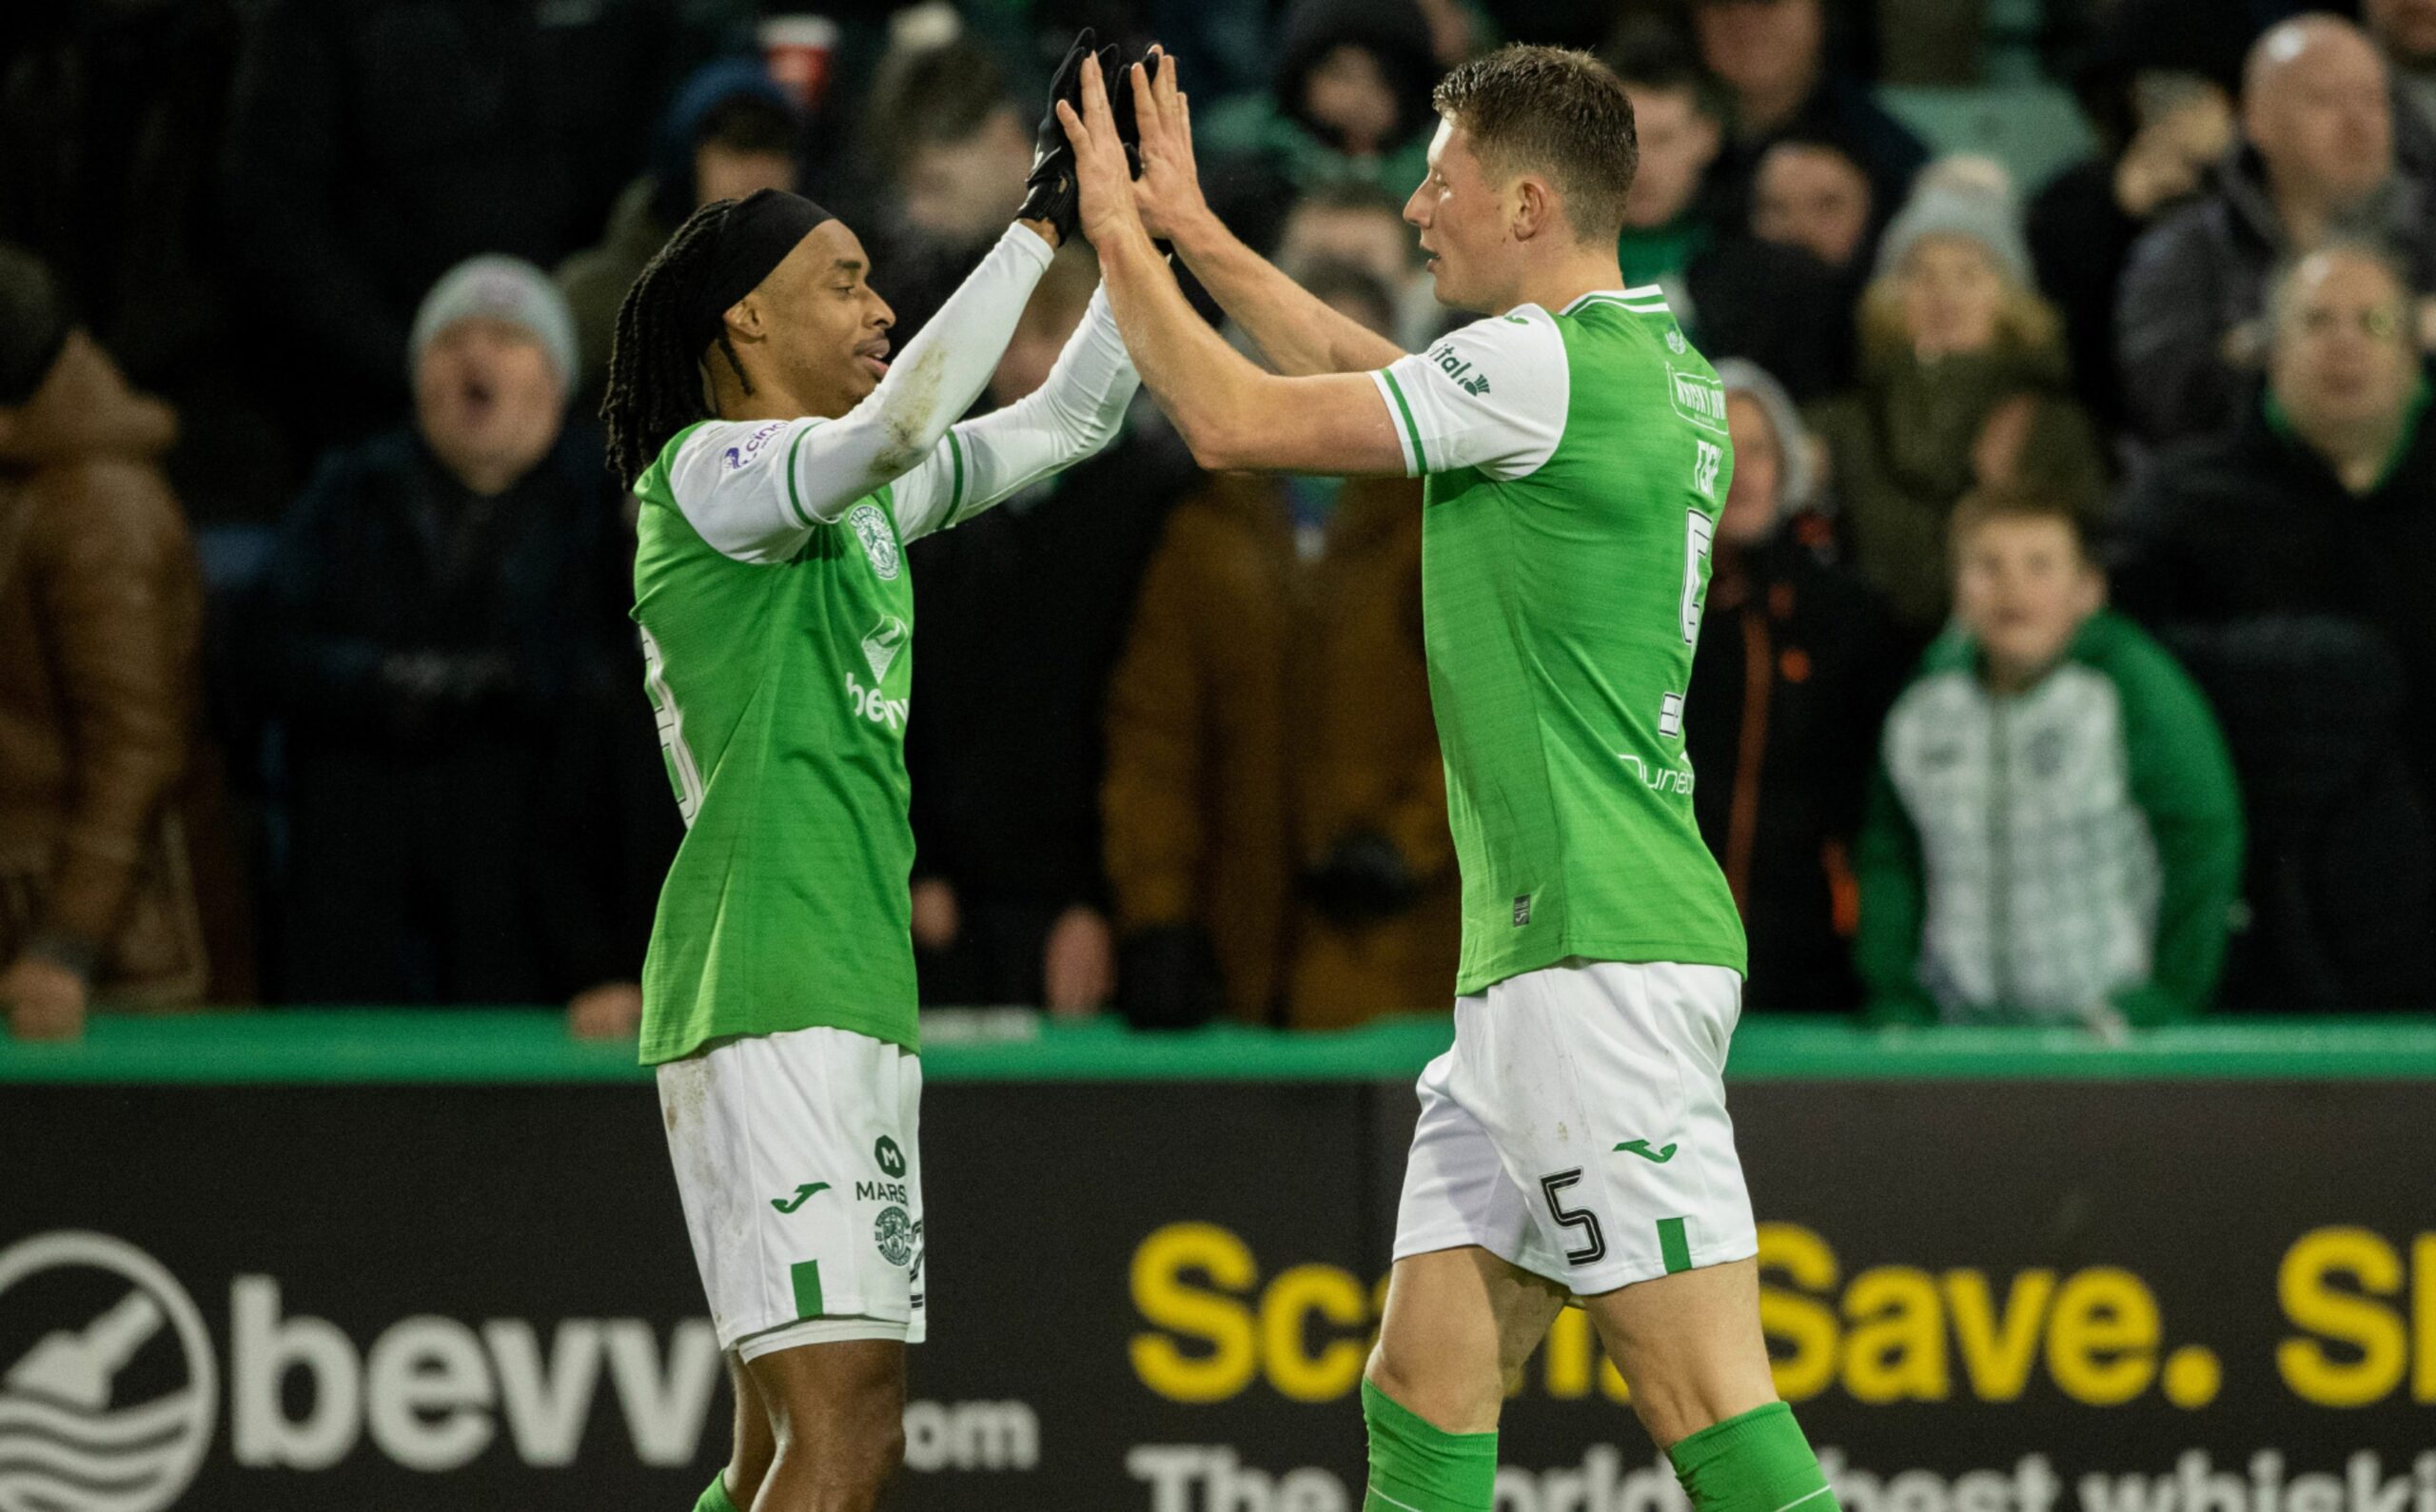 Hibernian's Will Fish celebrates scoring to make it 2-0 with his teammate Jair Tavares (l) against Aberdeen. Image: SNS 